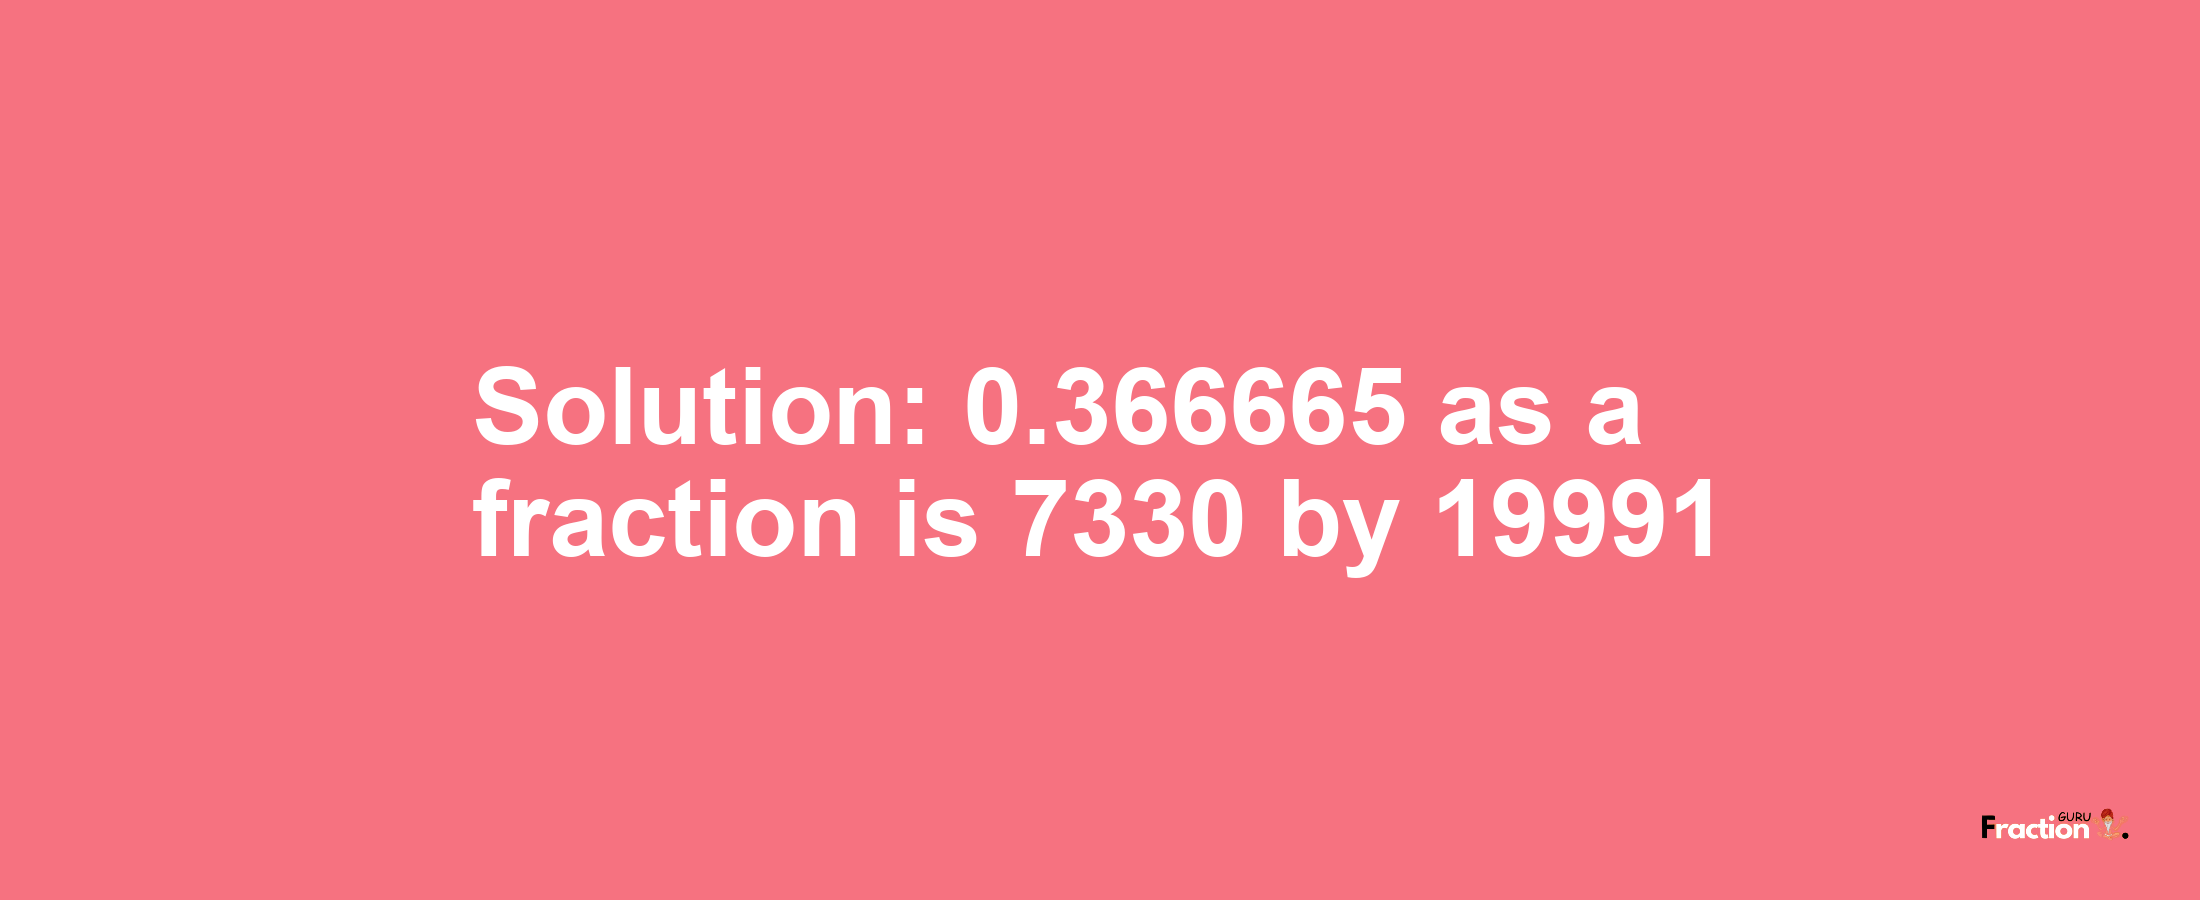 Solution:0.366665 as a fraction is 7330/19991